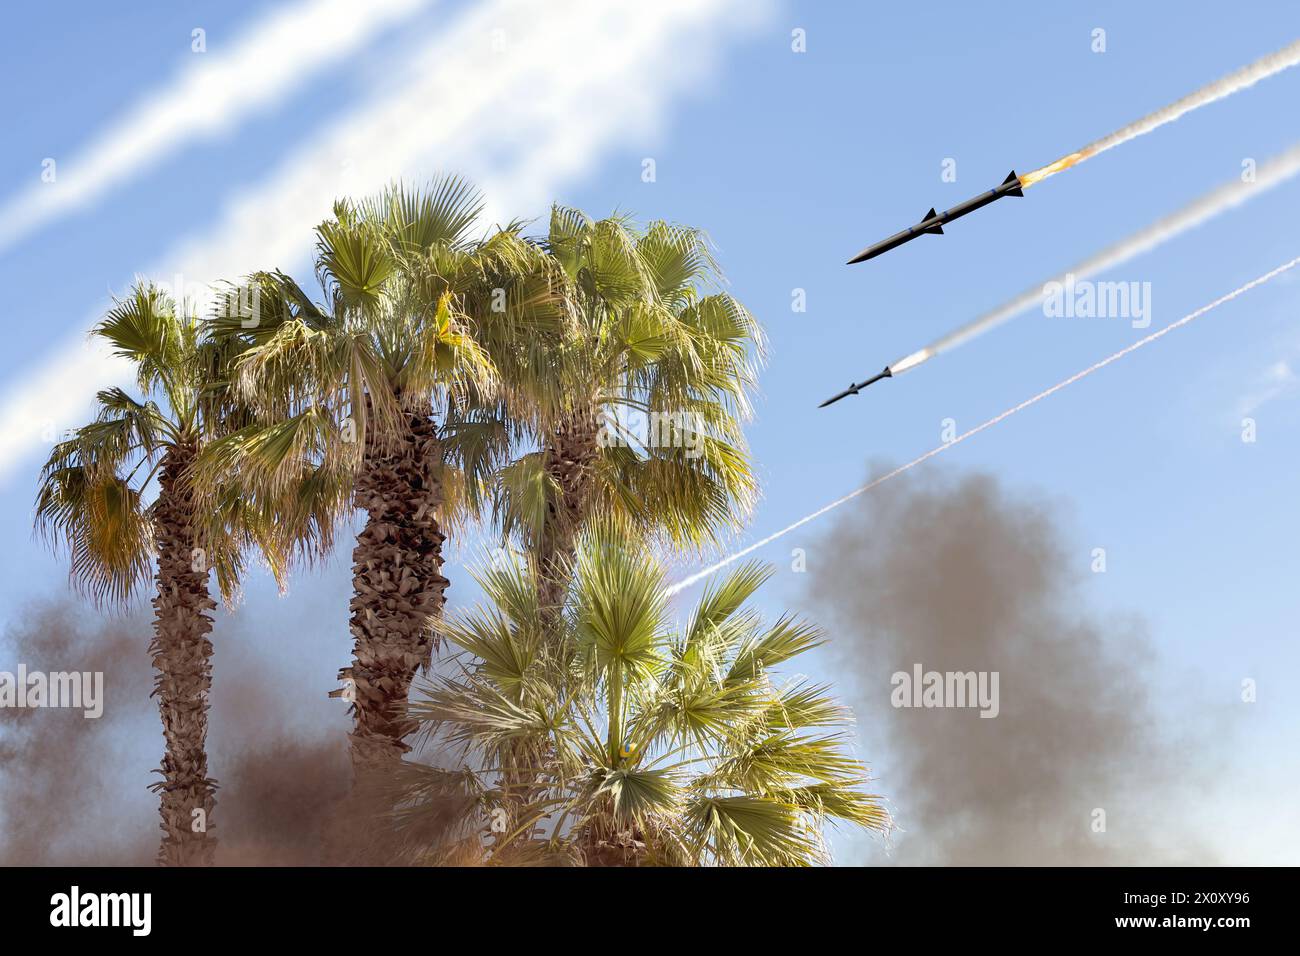 Ballistic missiles in the sky on the background of palm trees , traces of missile launch. Concept: war between Iran and Israel, missile attack. Stock Photo